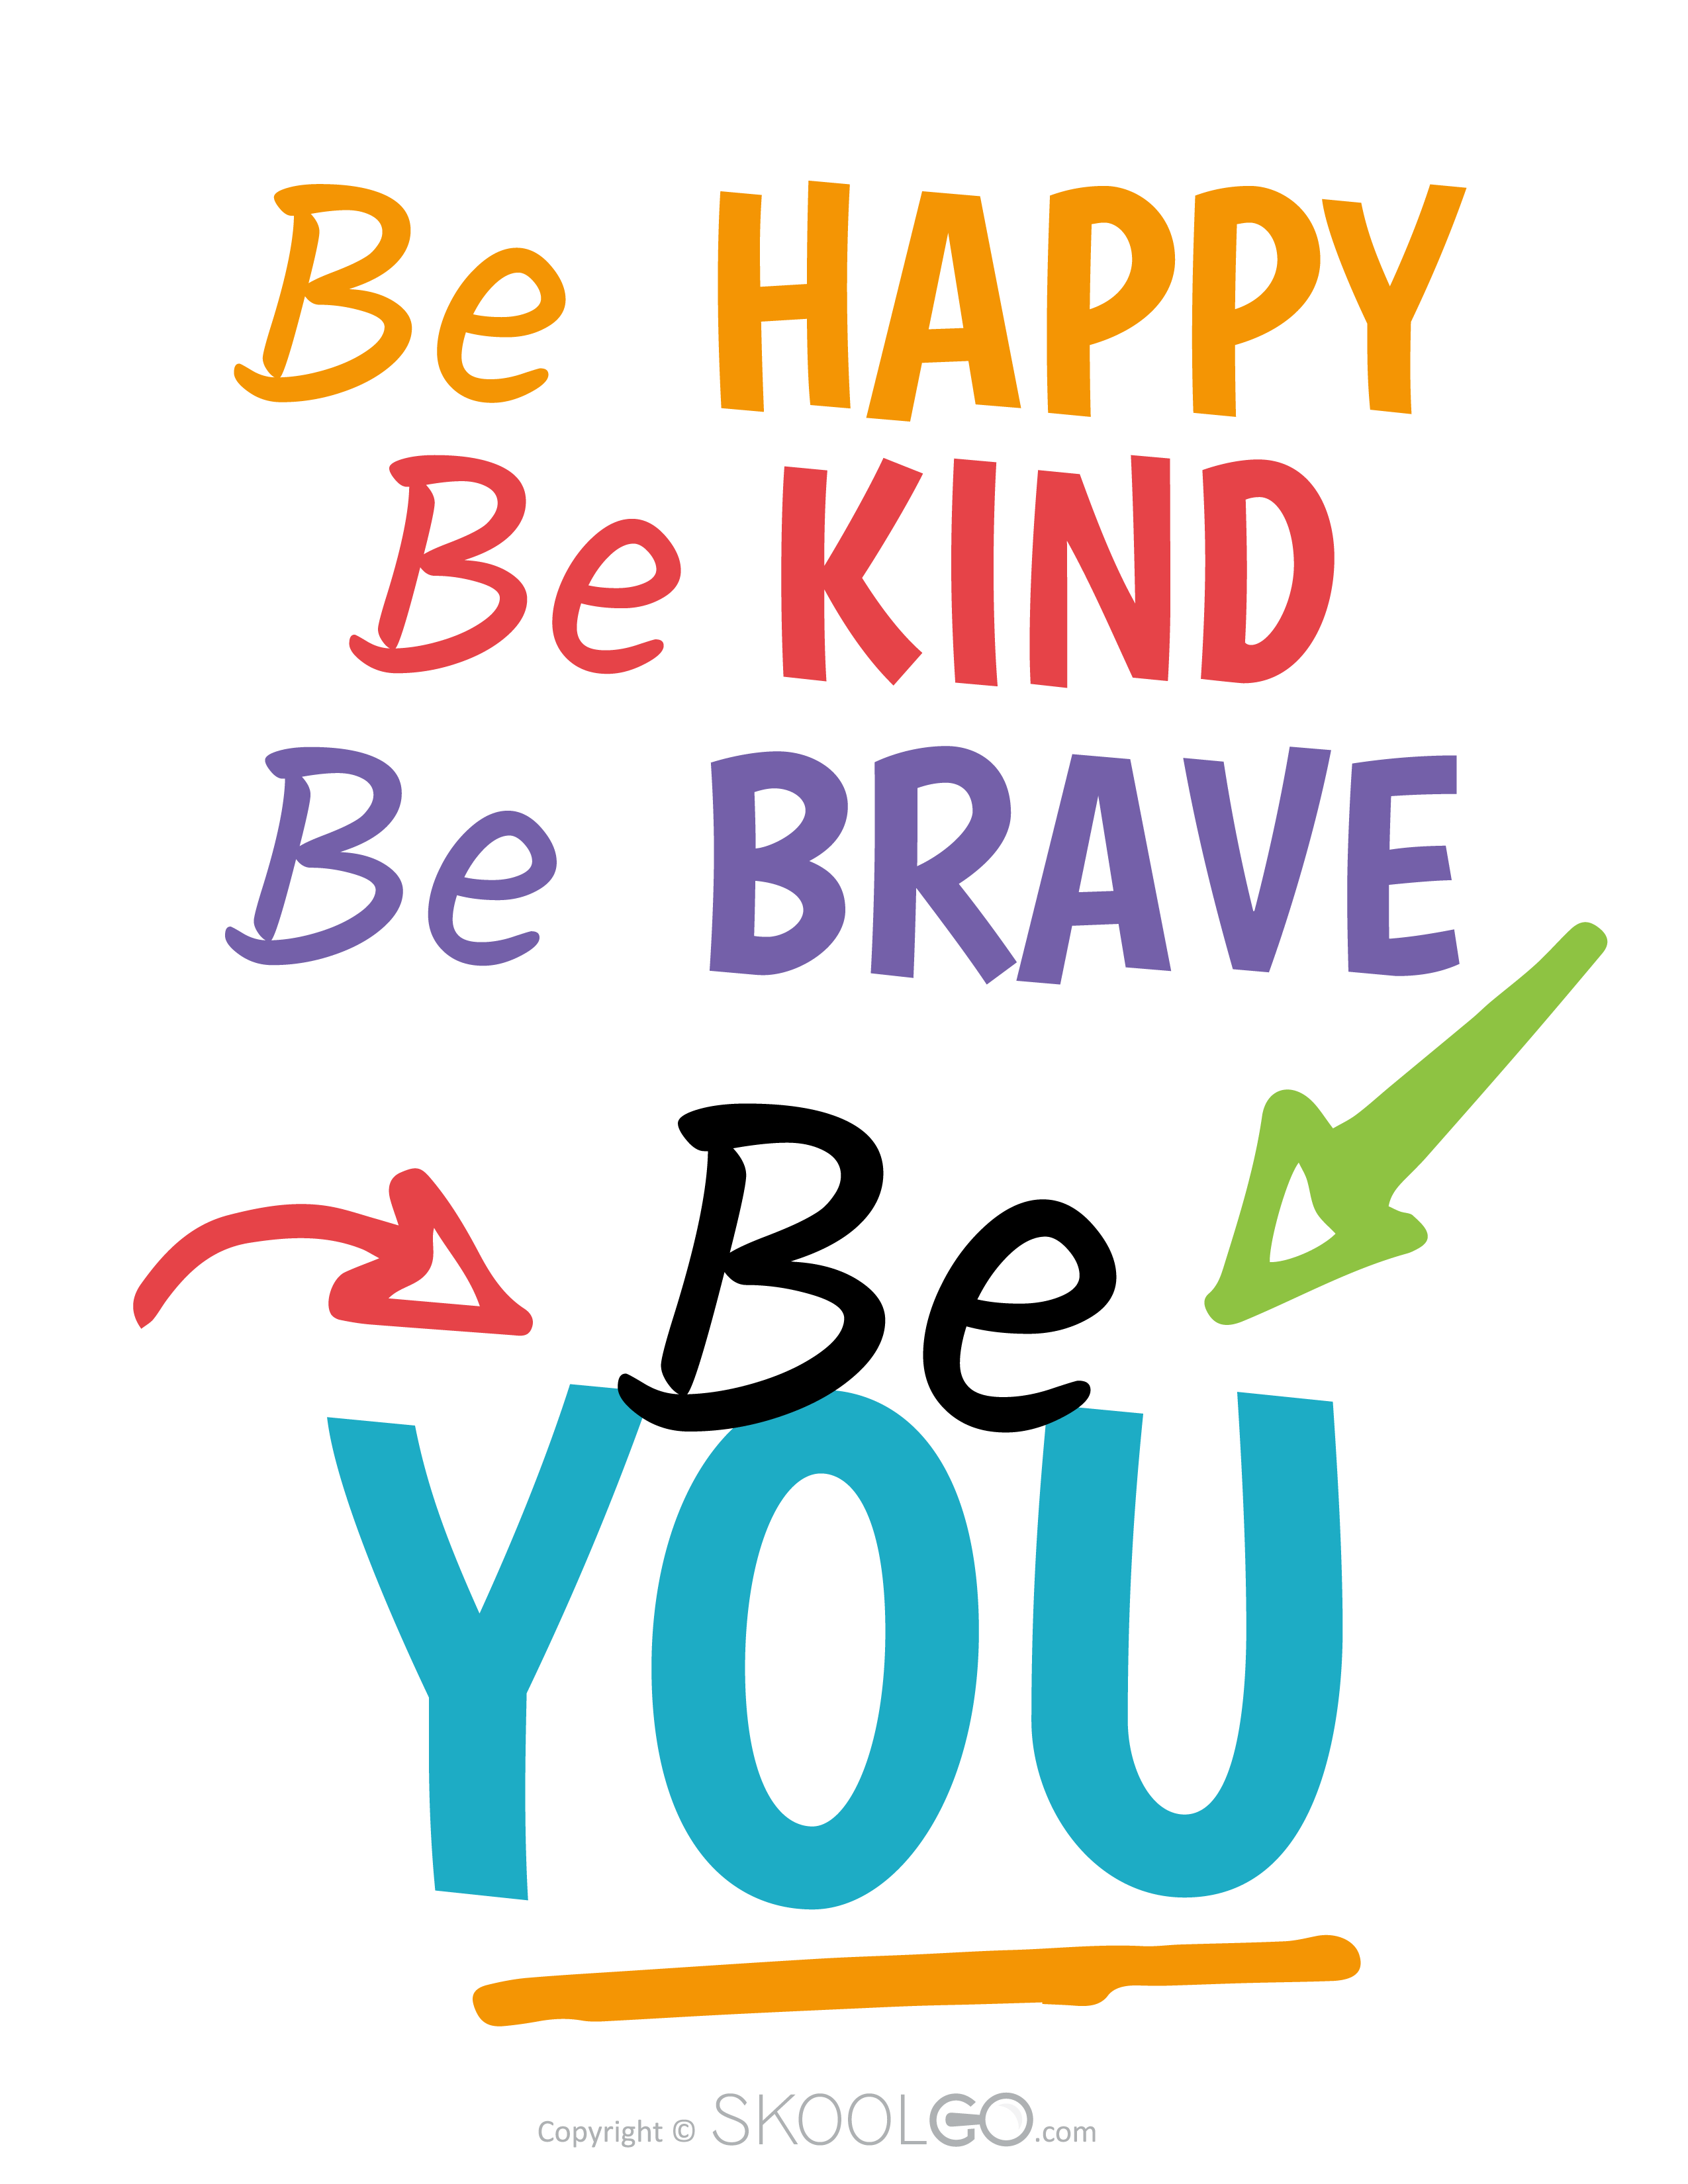 Be Happy Be Kind Be Brave Be You - Free Poster